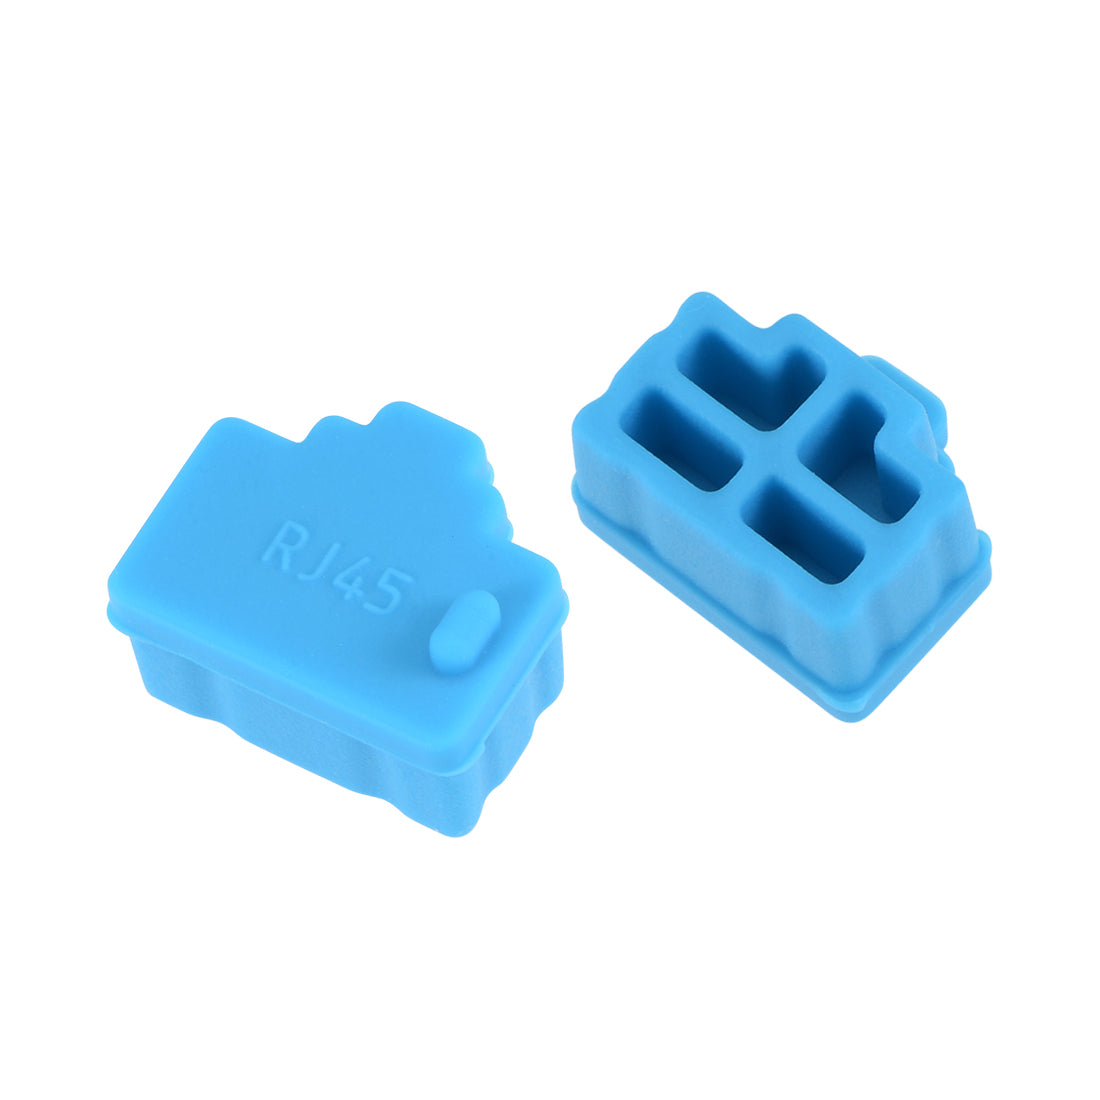 uxcell Uxcell 20pcs RJ45 Silicone Protectors Ethernet Hub Port Anti Dust Cap Cover, Blue